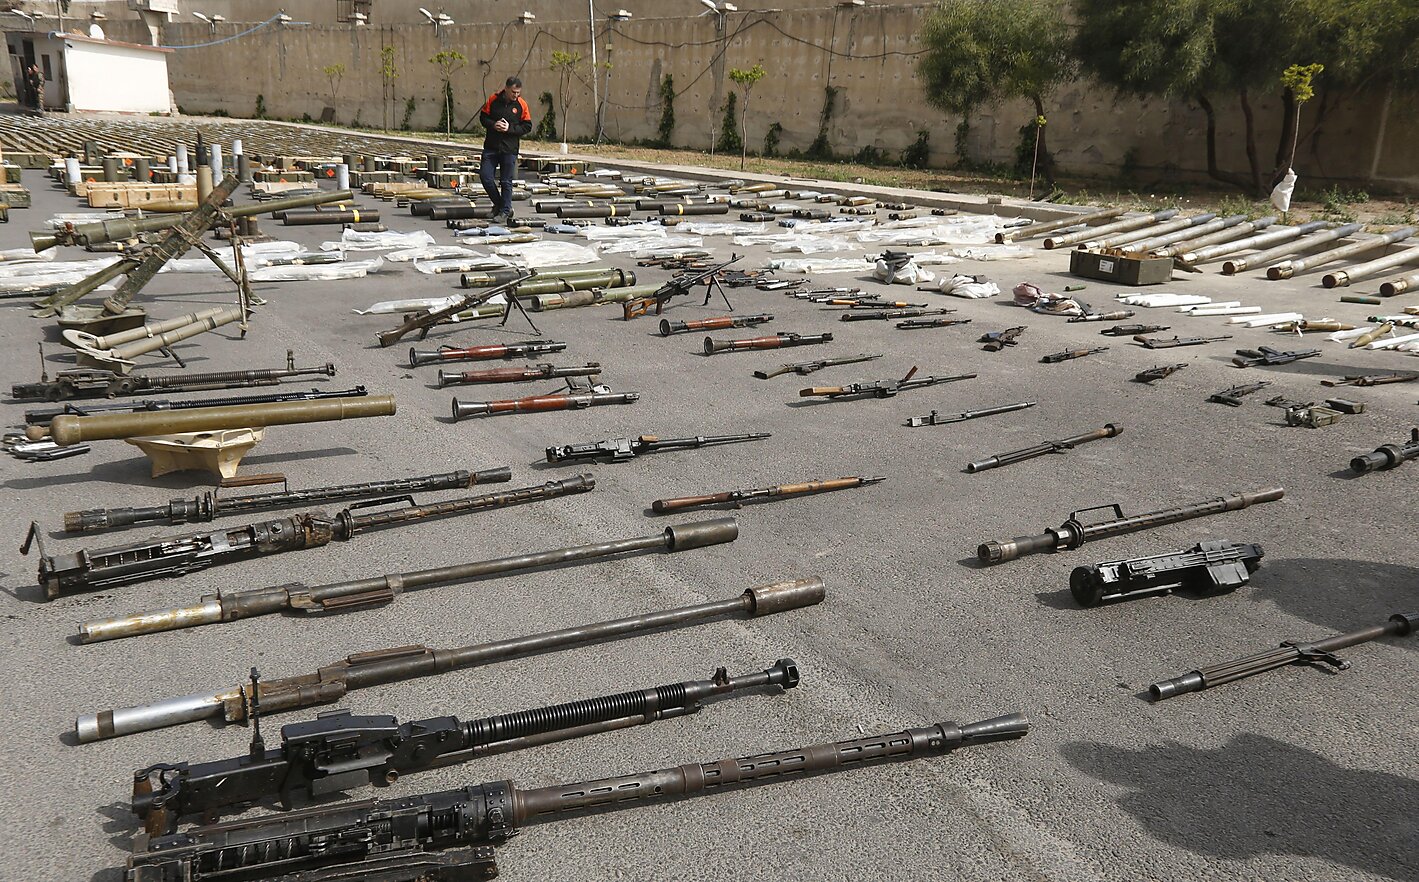 Small arms and light weapons seized by the Syrian government